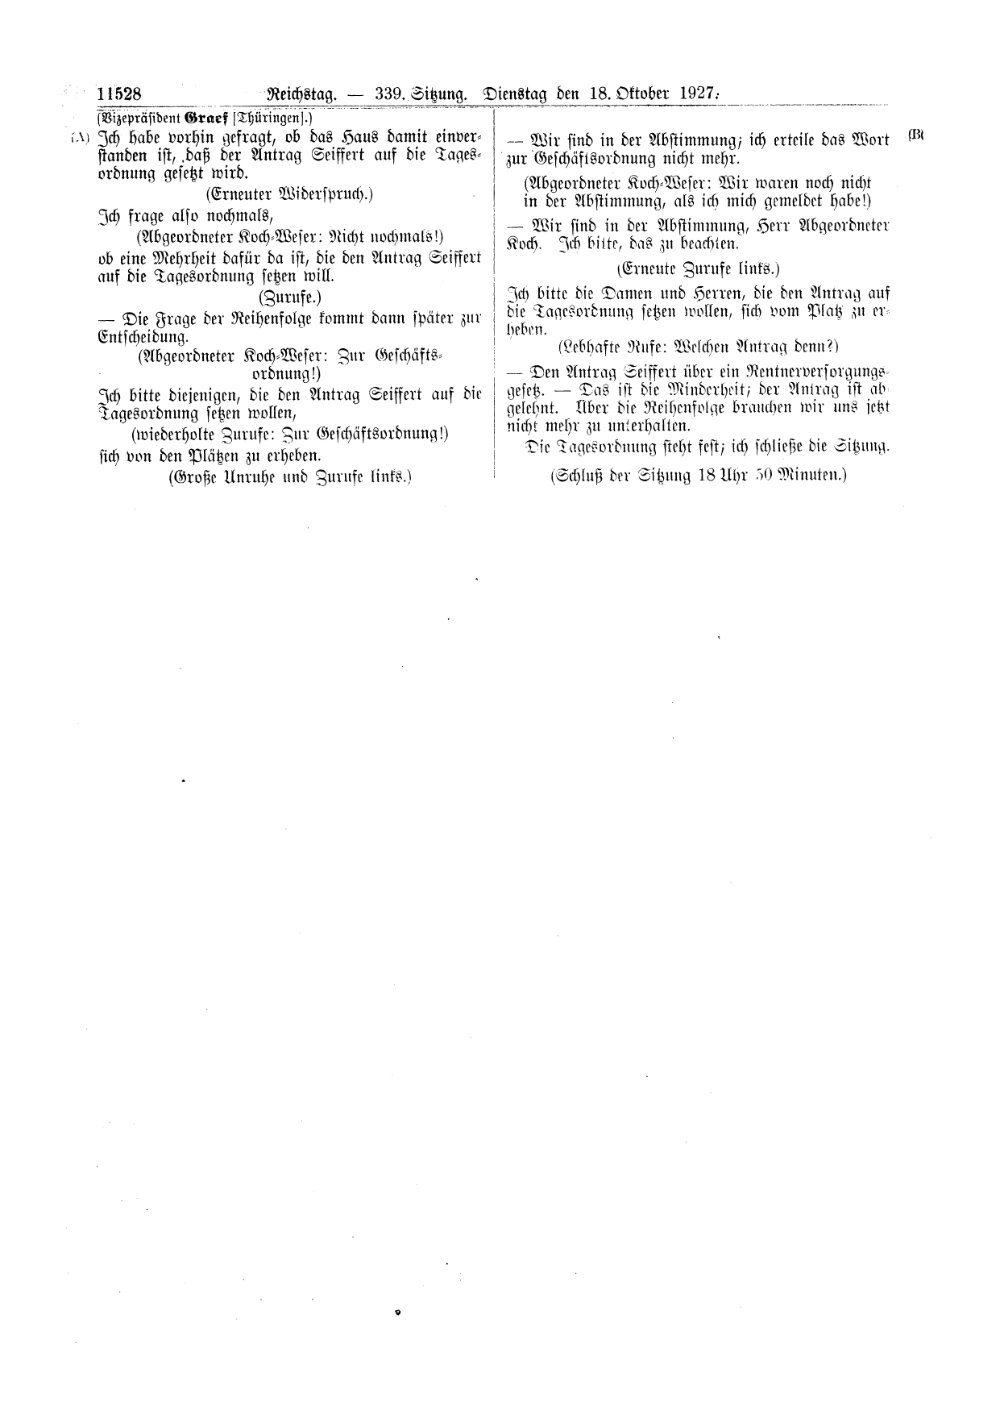 Scan of page 11528